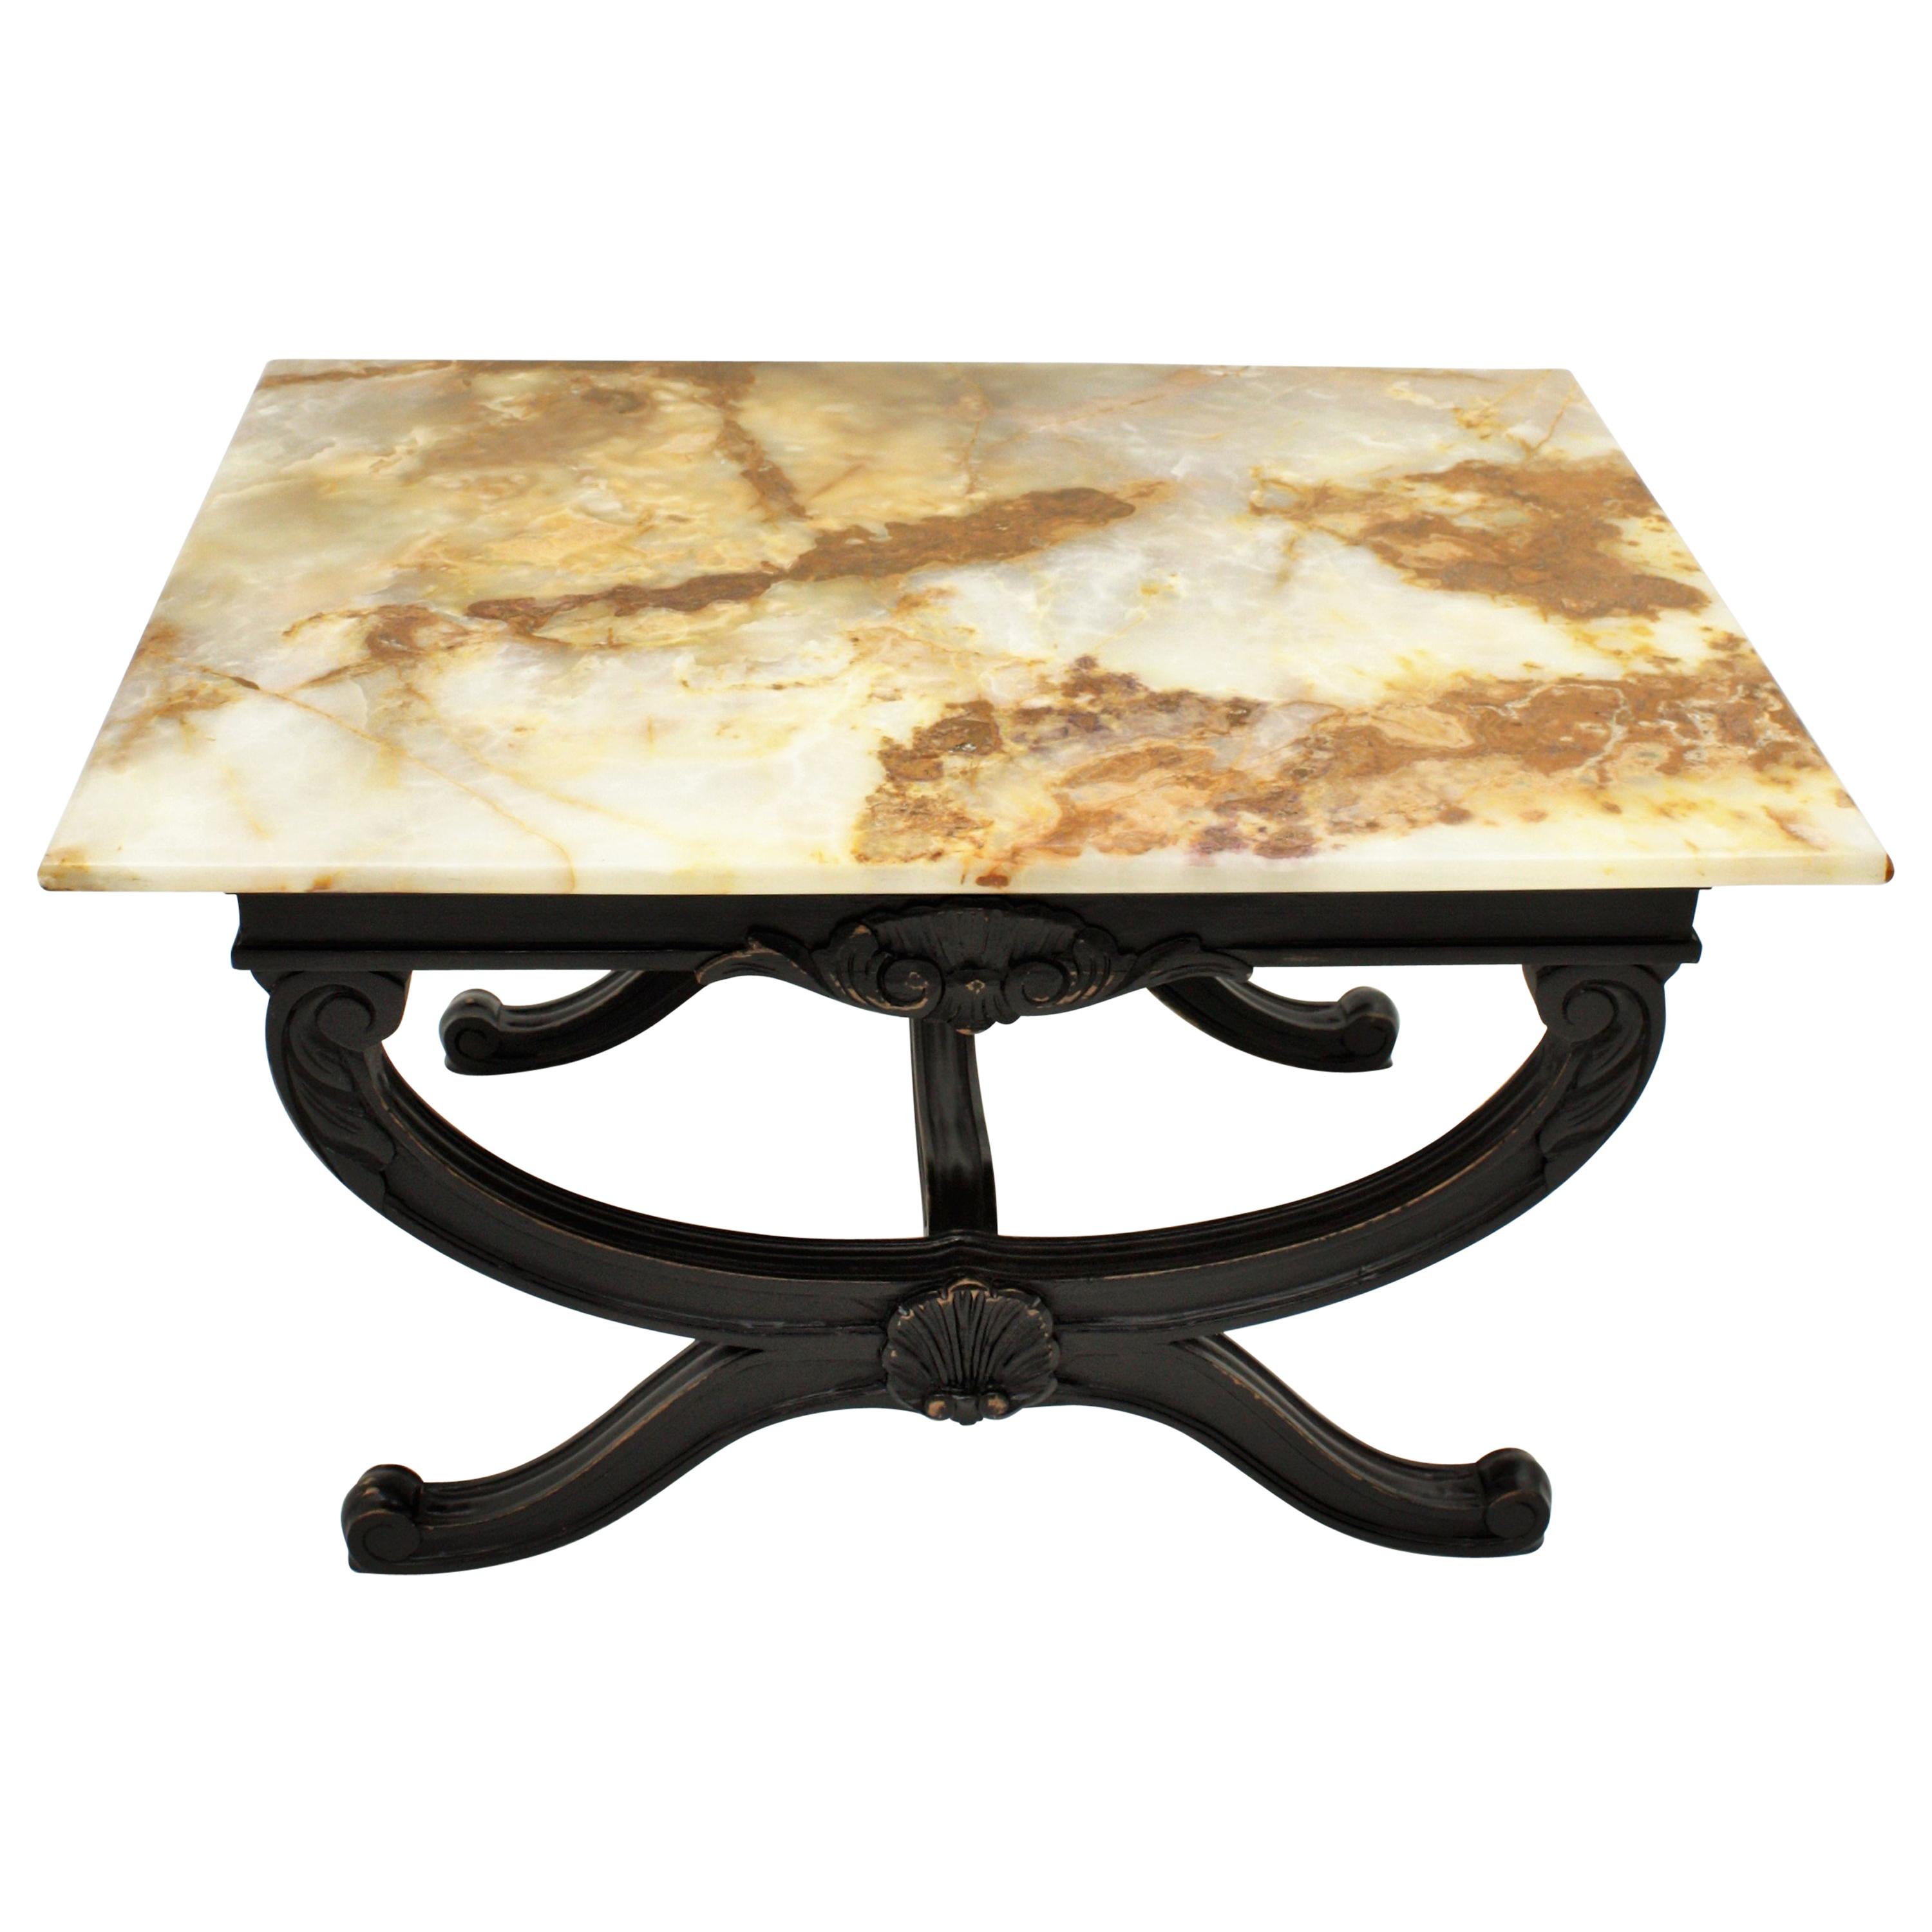 1950s French Carved Wood Coffee Table with Onyx Top In Good Condition For Sale In Barcelona, ES